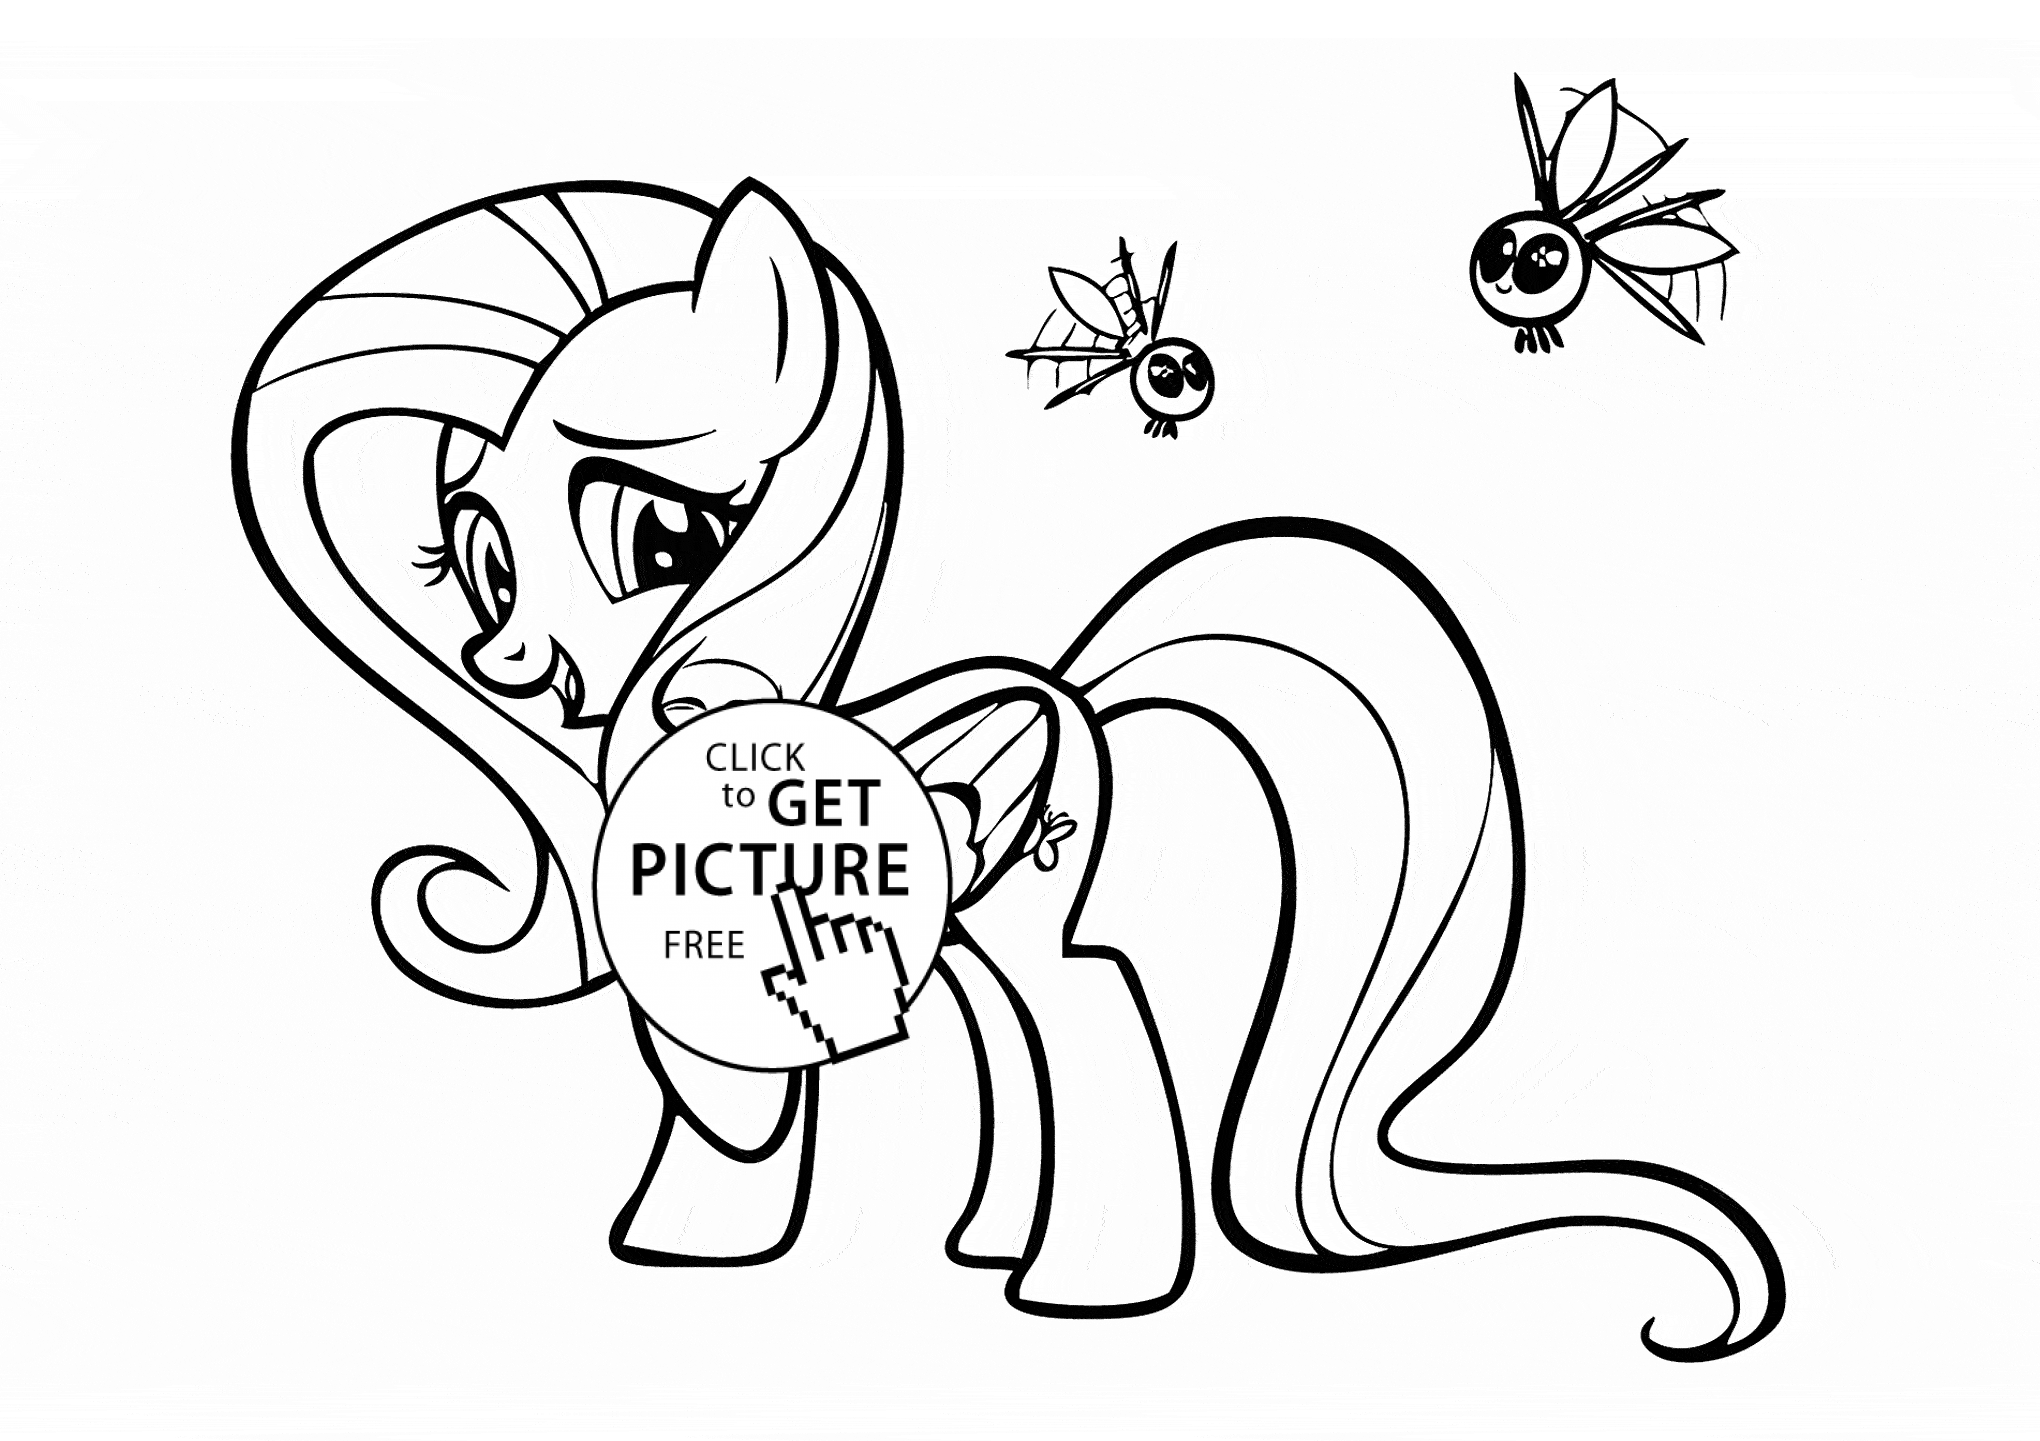 Funny Fluttershy - My little pony coloring page for kids, for ...